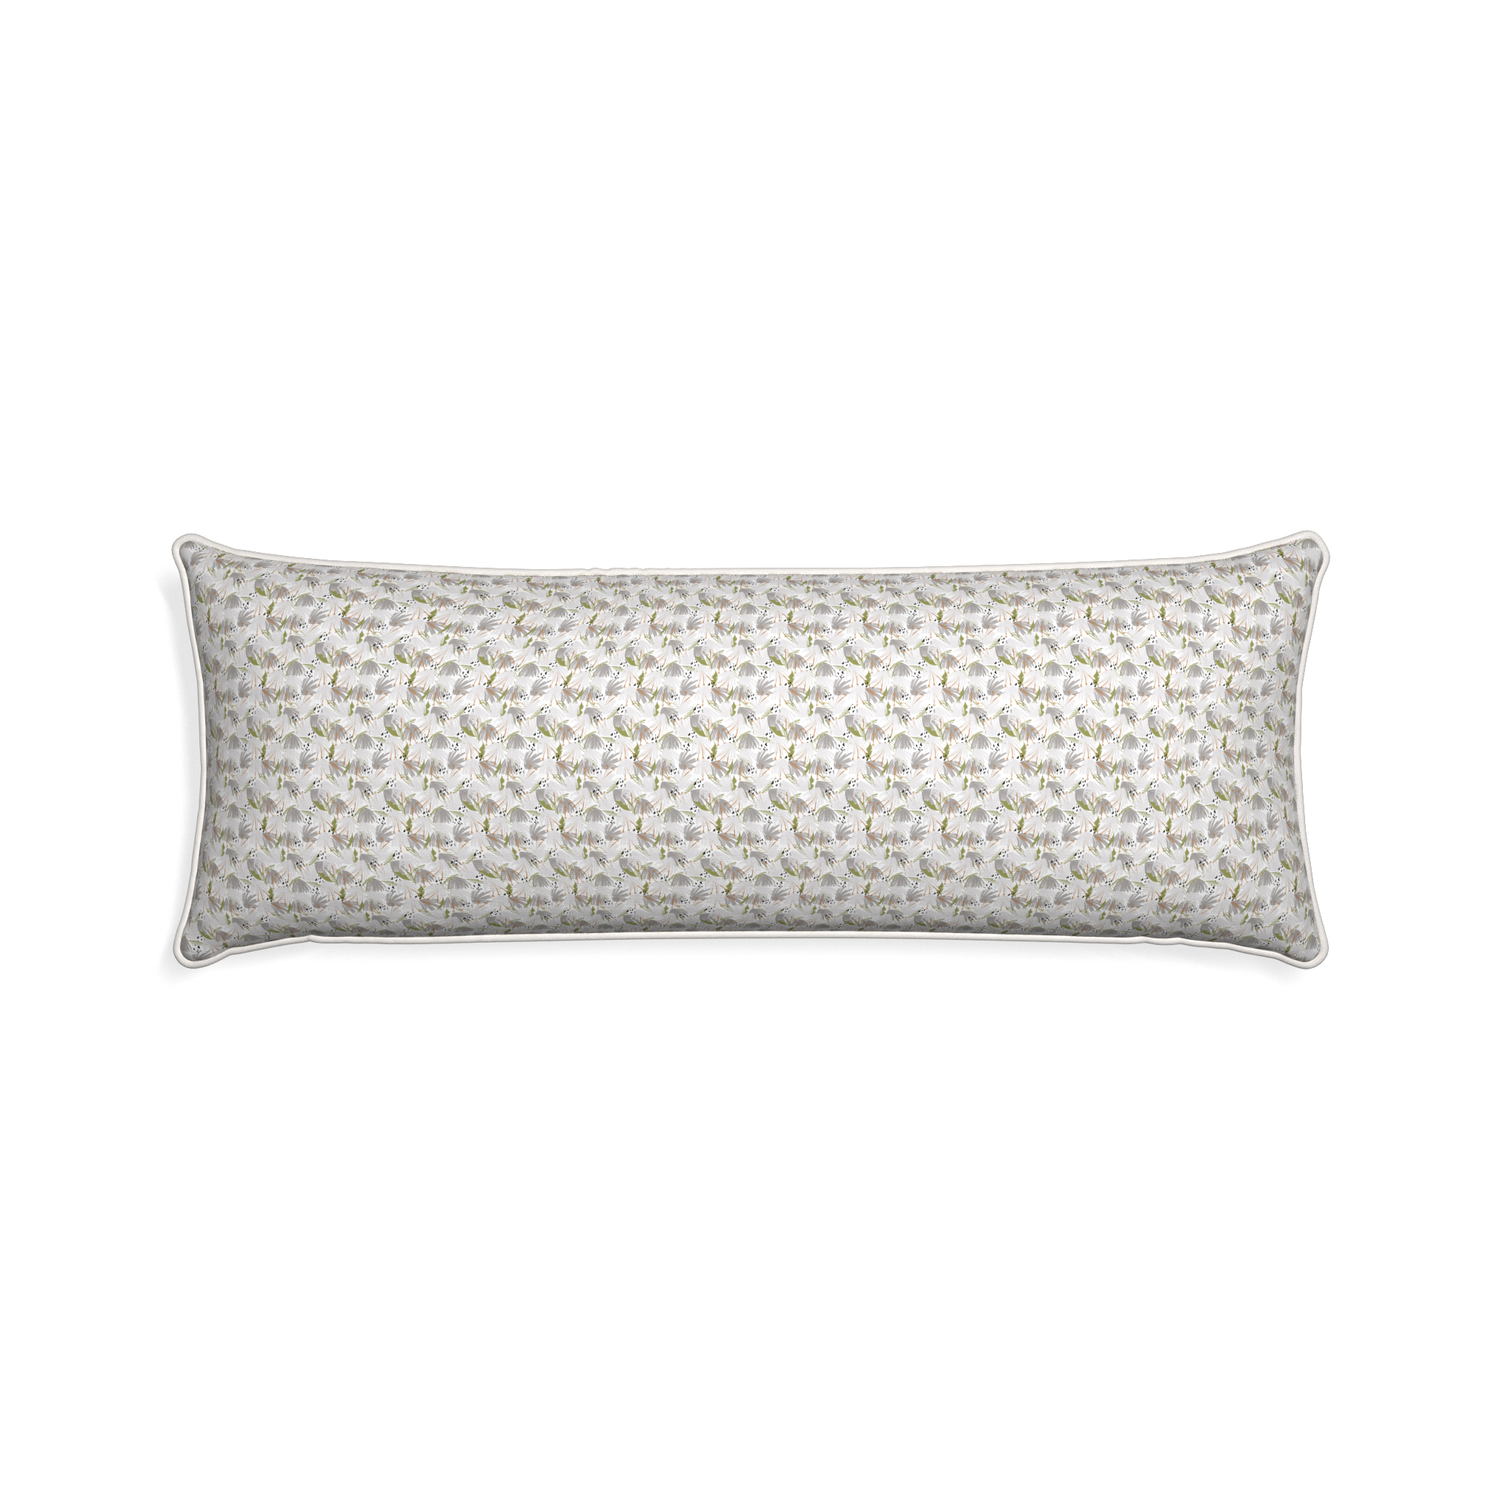 Xl-lumbar eden grey custom grey floralpillow with snow piping on white background